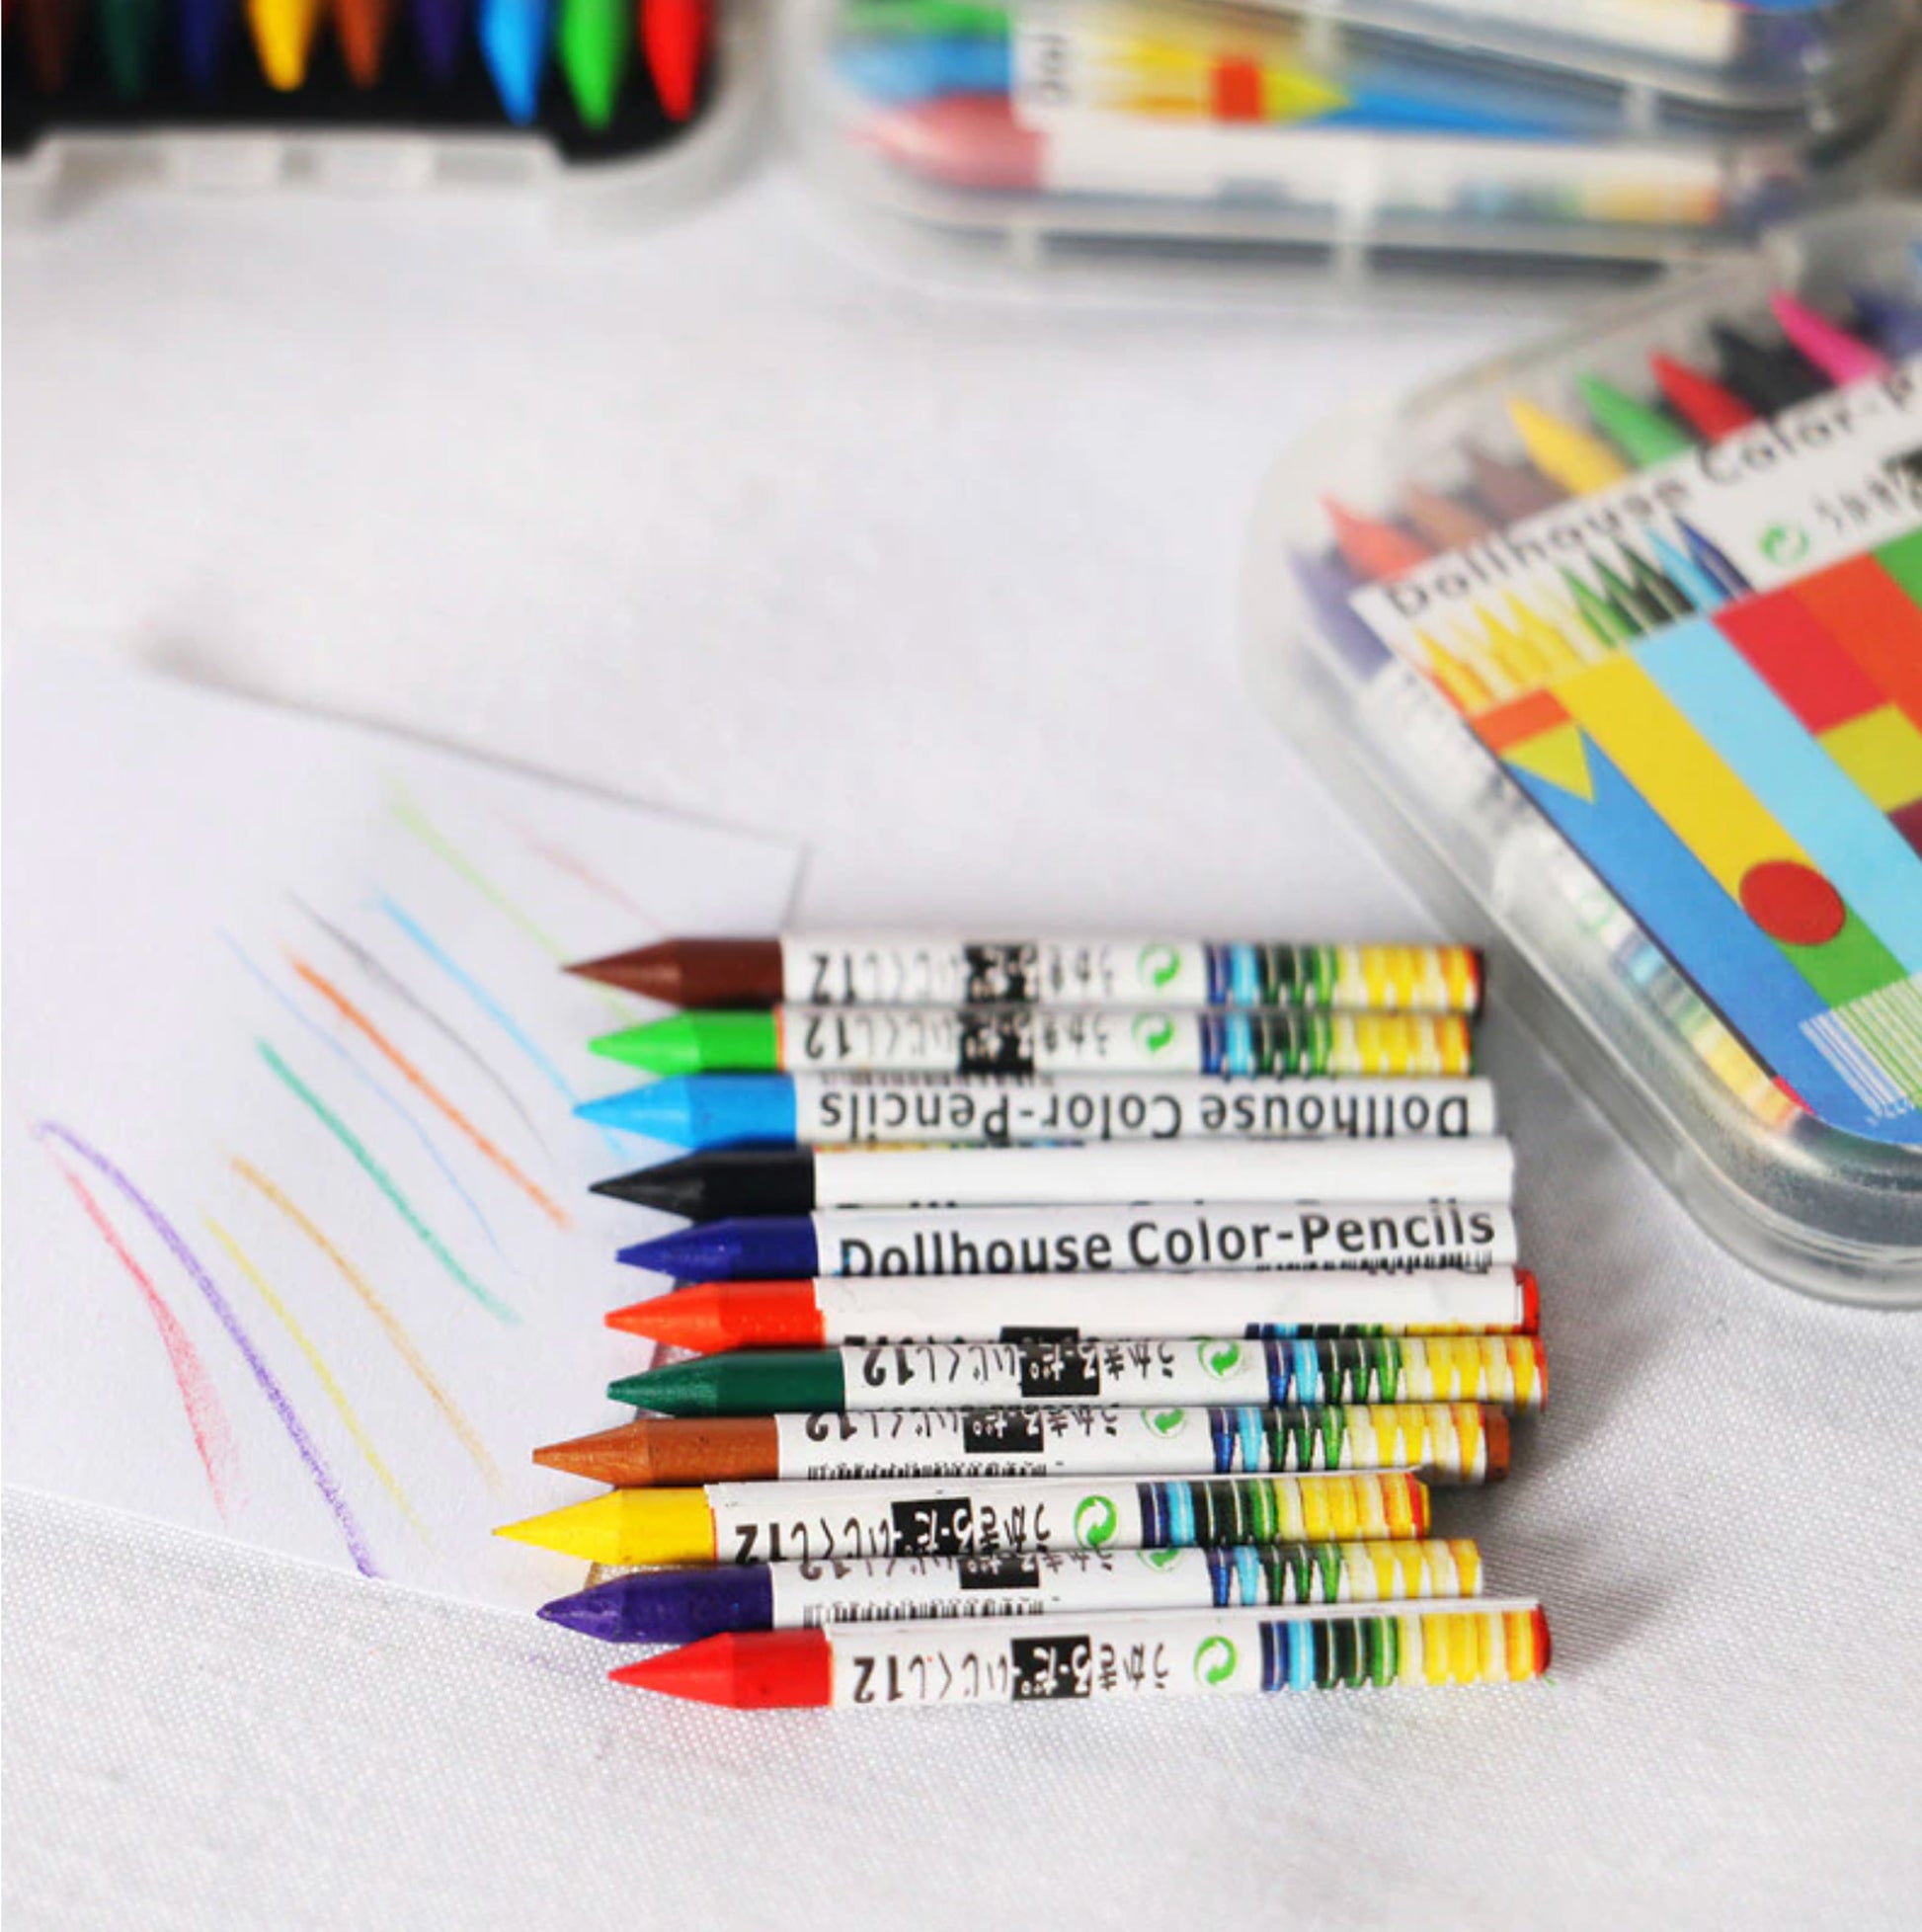    color-crayons for dolls